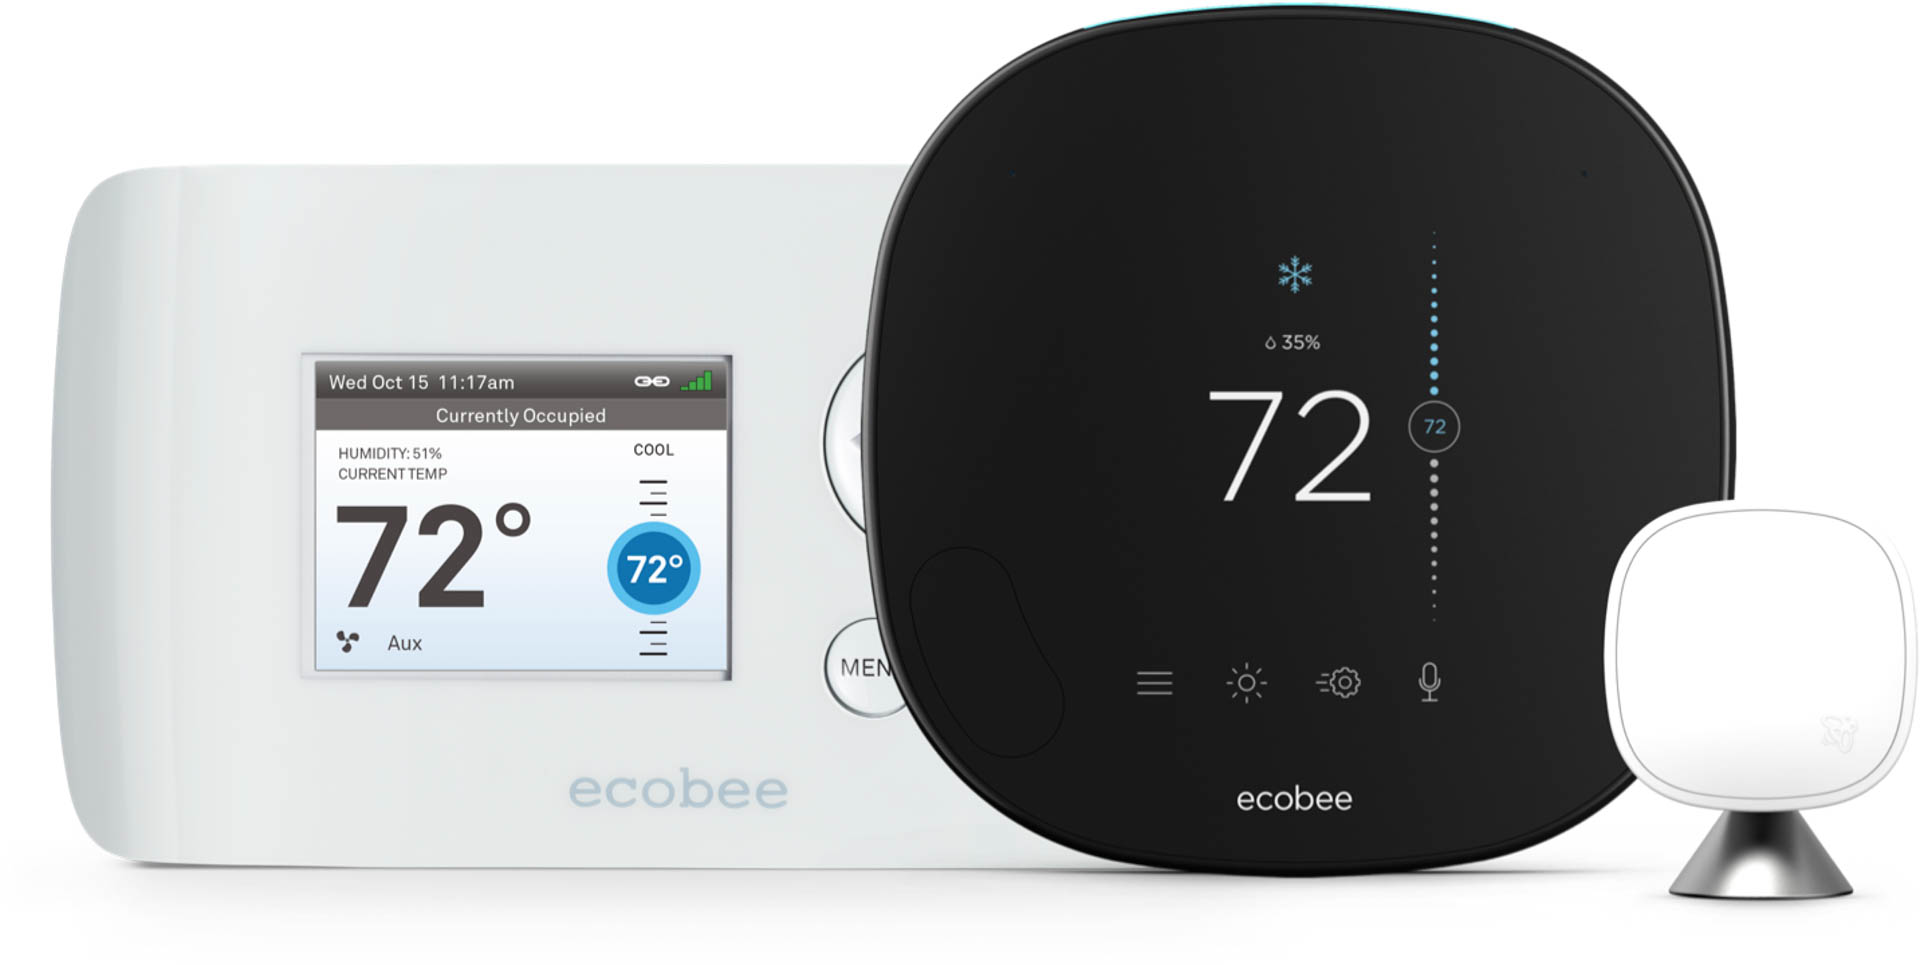 Smart thermostats, like these from ecobee, can help tenants to save on utility costs while increasing comfort. The company also offers the SmartBuildings system for building-level management of this technology. Image: ecobee.